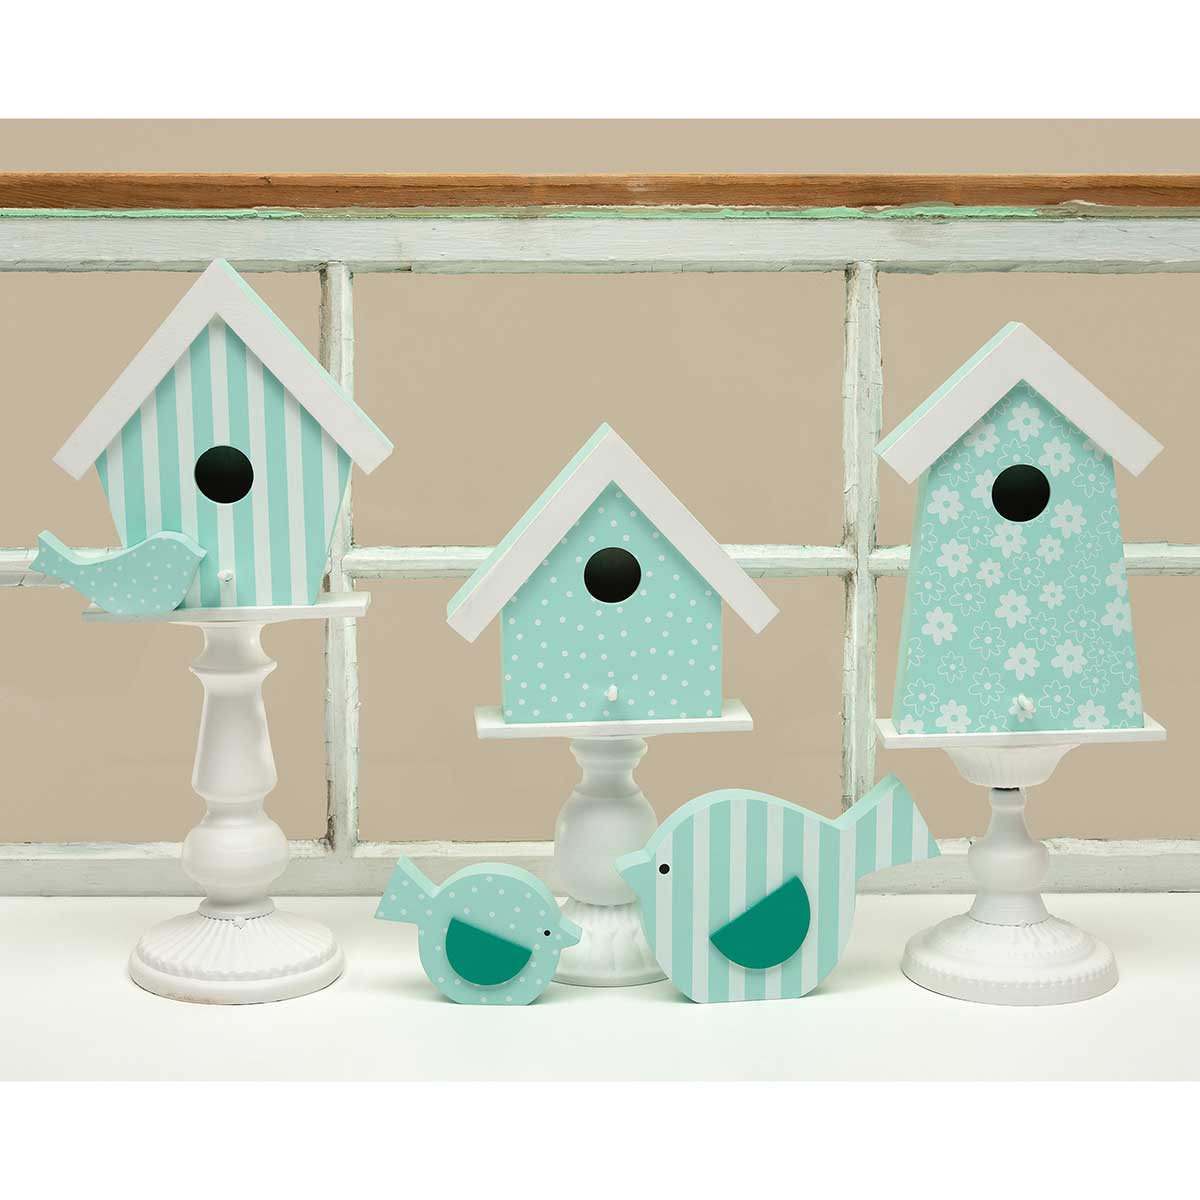 b50 BIRDHOUSE BLUE MEADOW STRIPE 6.75IN X 2.75IN X 7.25IN WOOD - Click Image to Close